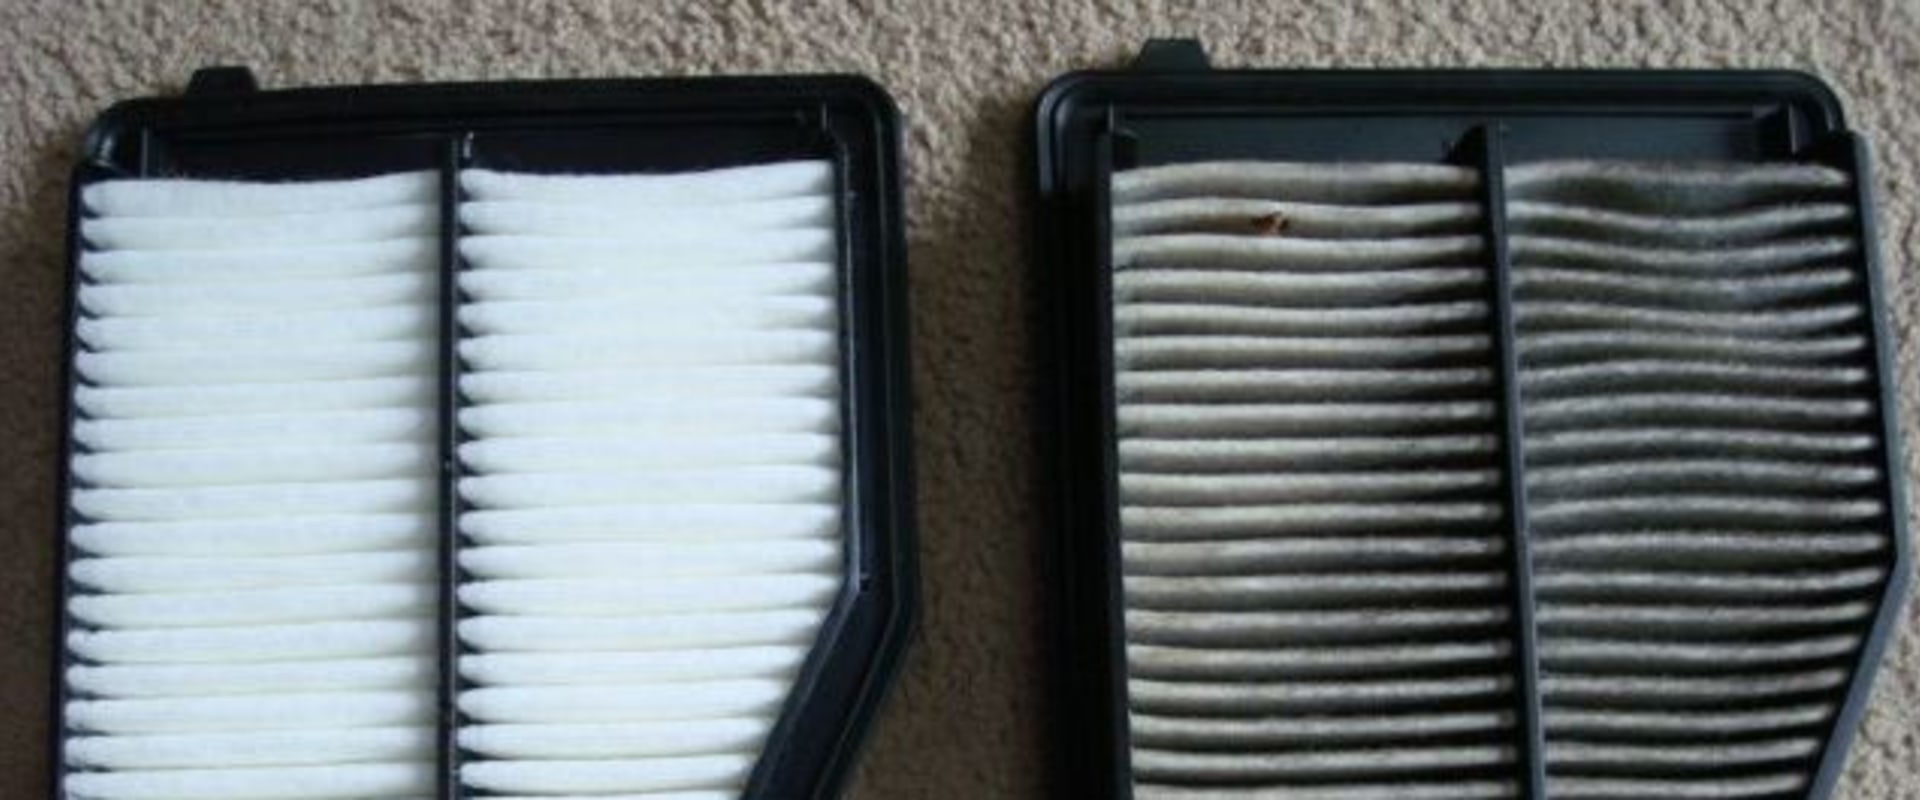 When to Change Your Motorcycle's Air Filter